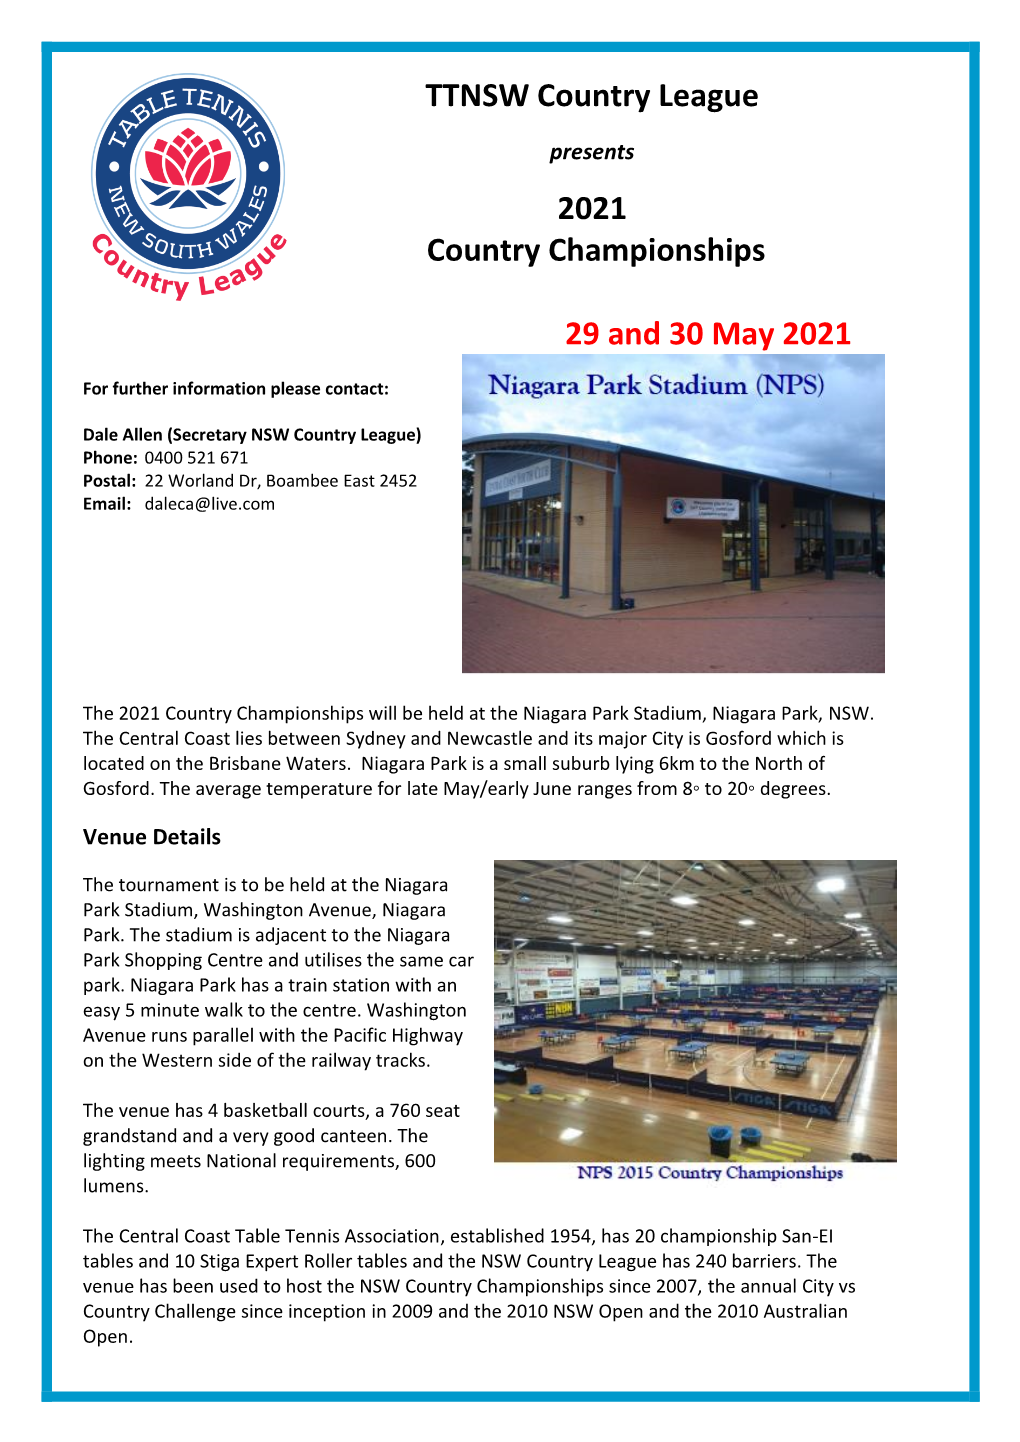 TTNSW Country League 2021 Country Championships 29 and 30